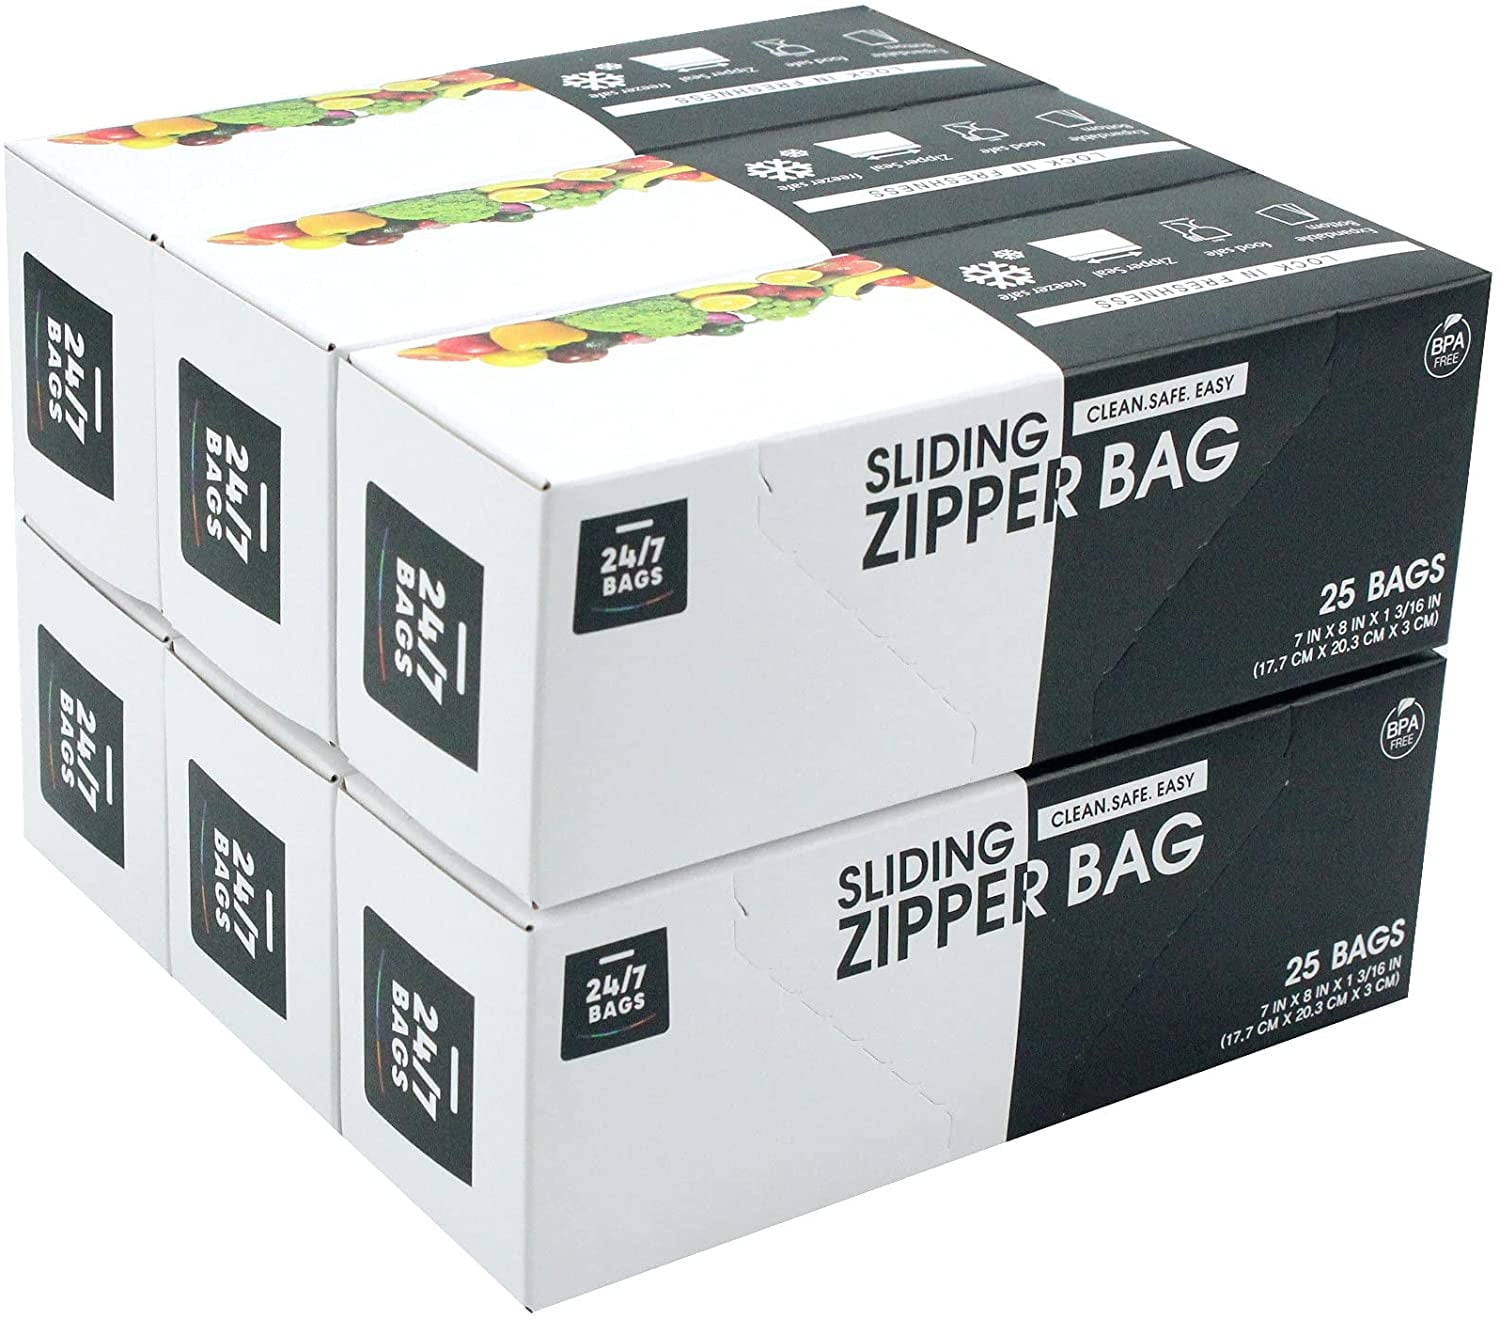 24/7 Bags | Slider Storage Bags, Pint Size with Expandable Bottom, 200 Count (8 Packs of 25)